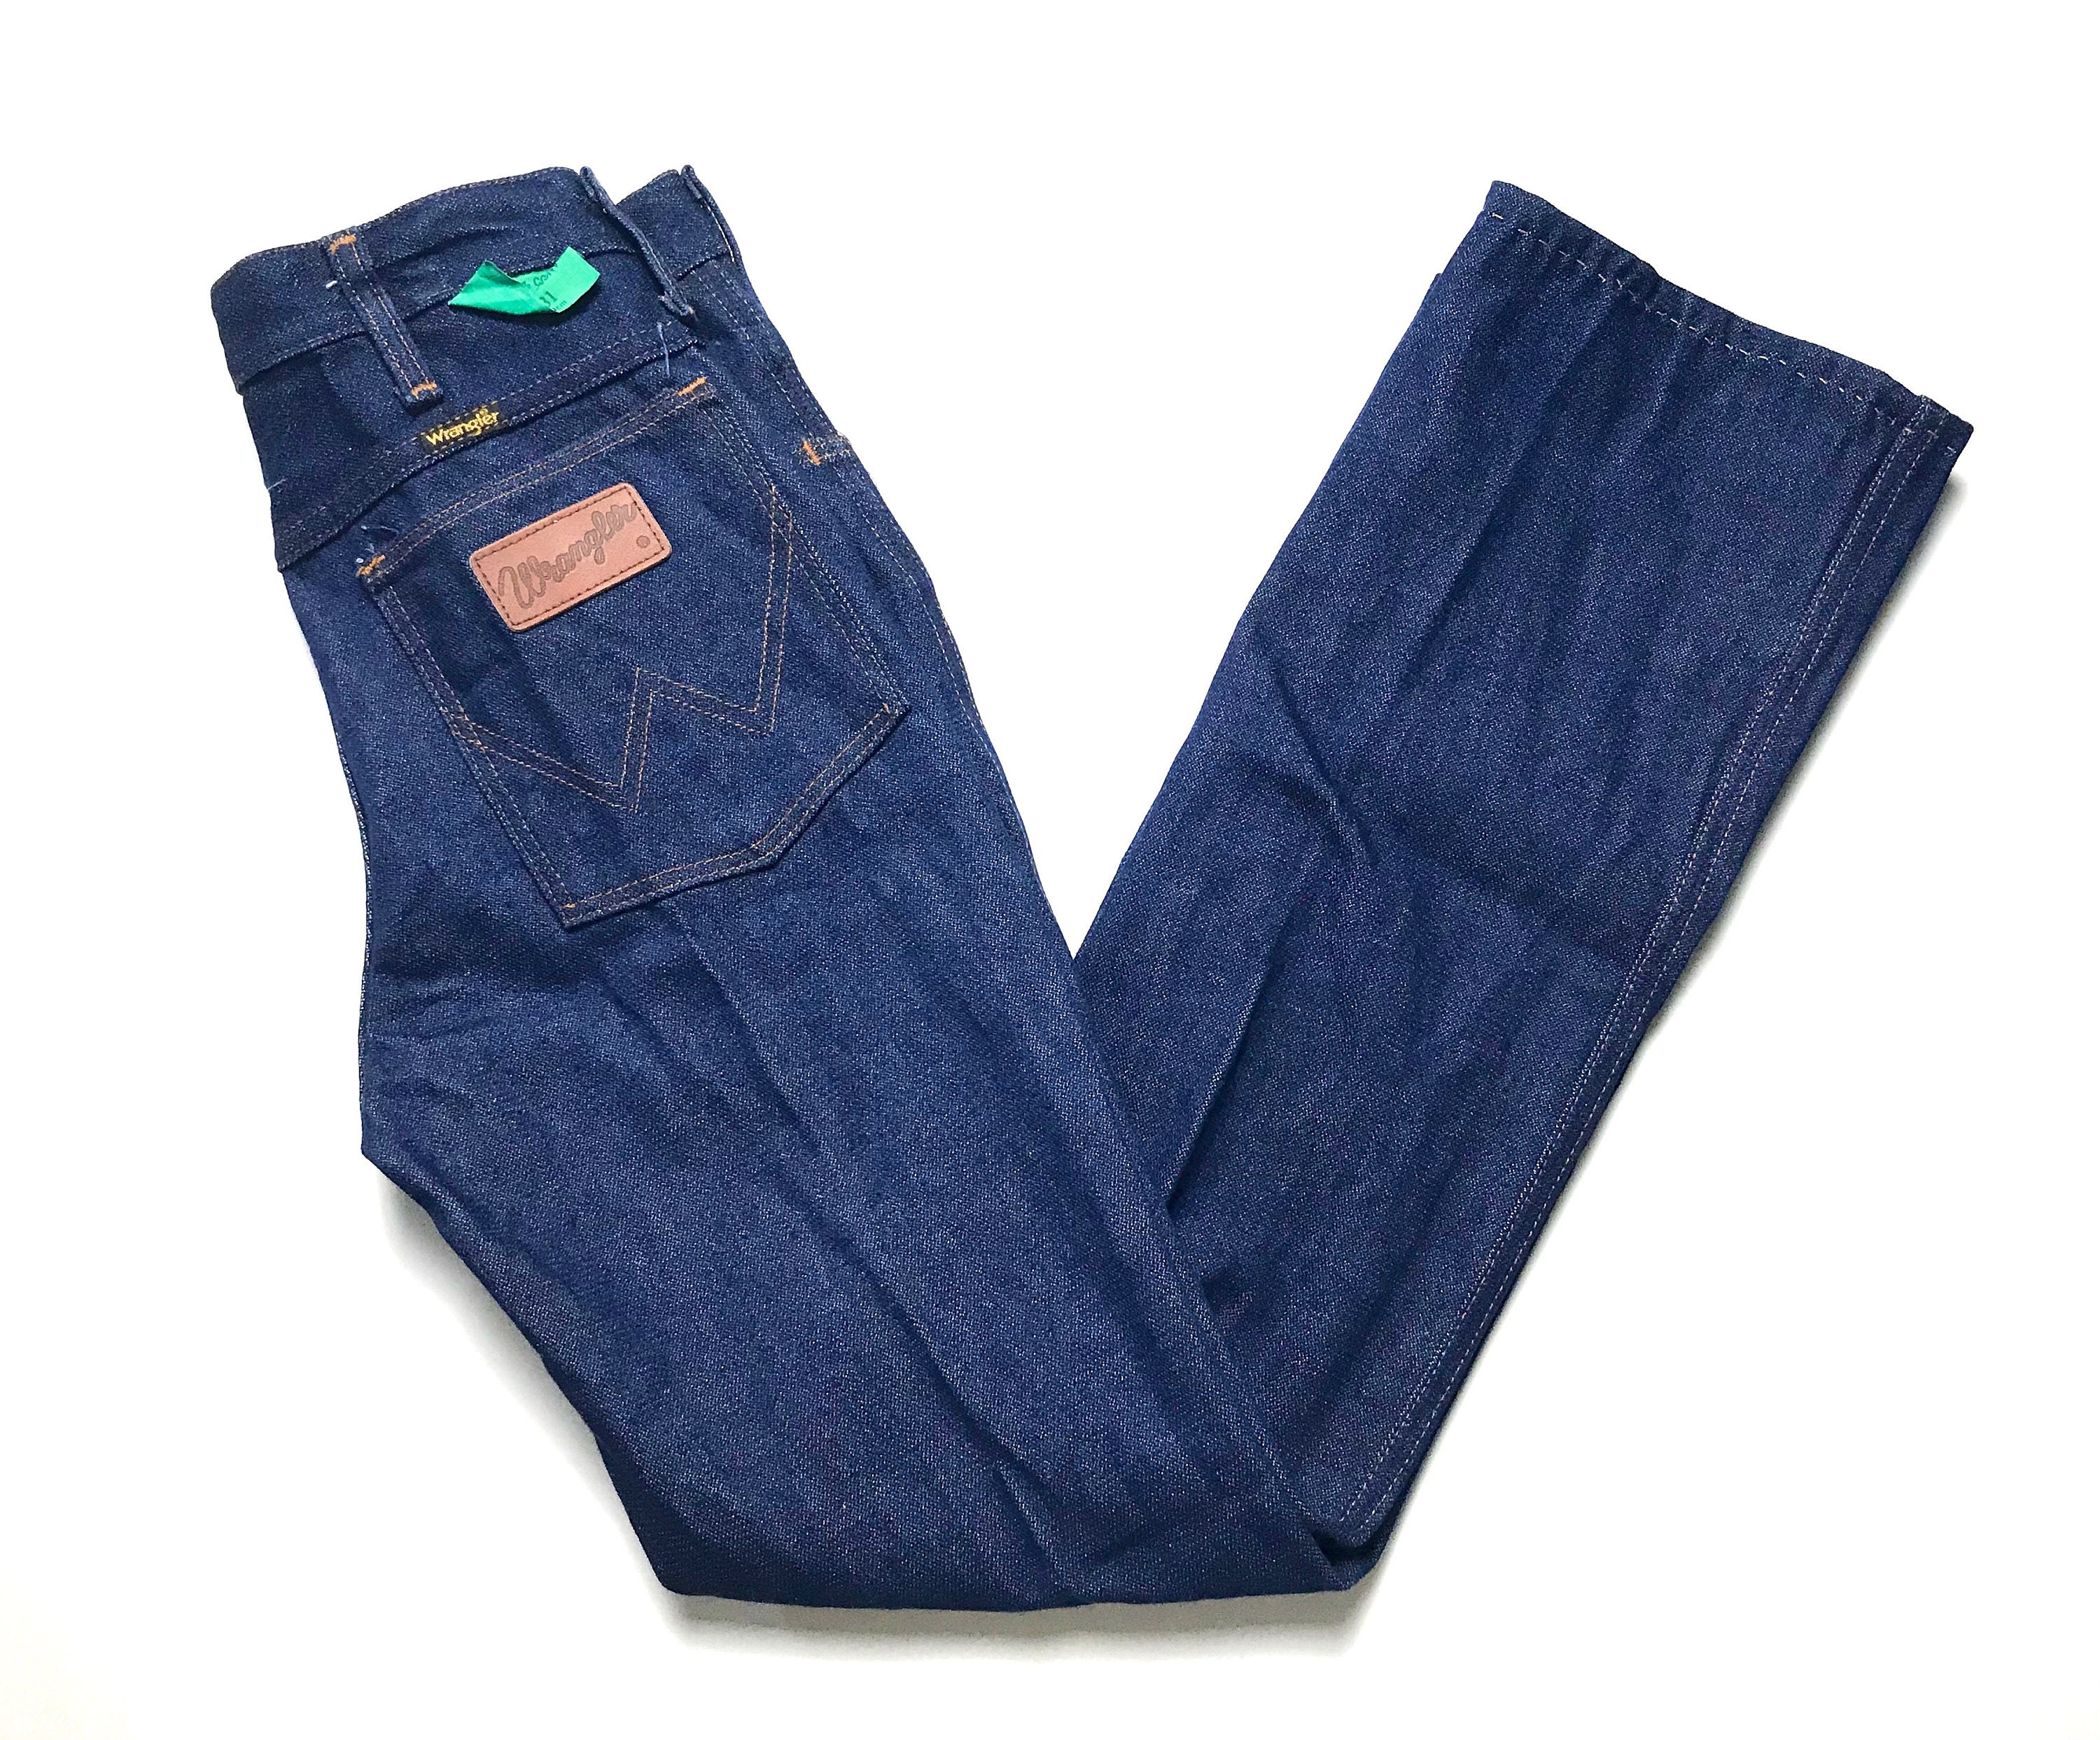 NEW W/ Tags Vintage 1980s WRANGLER Jeans Measure  X - Etsy